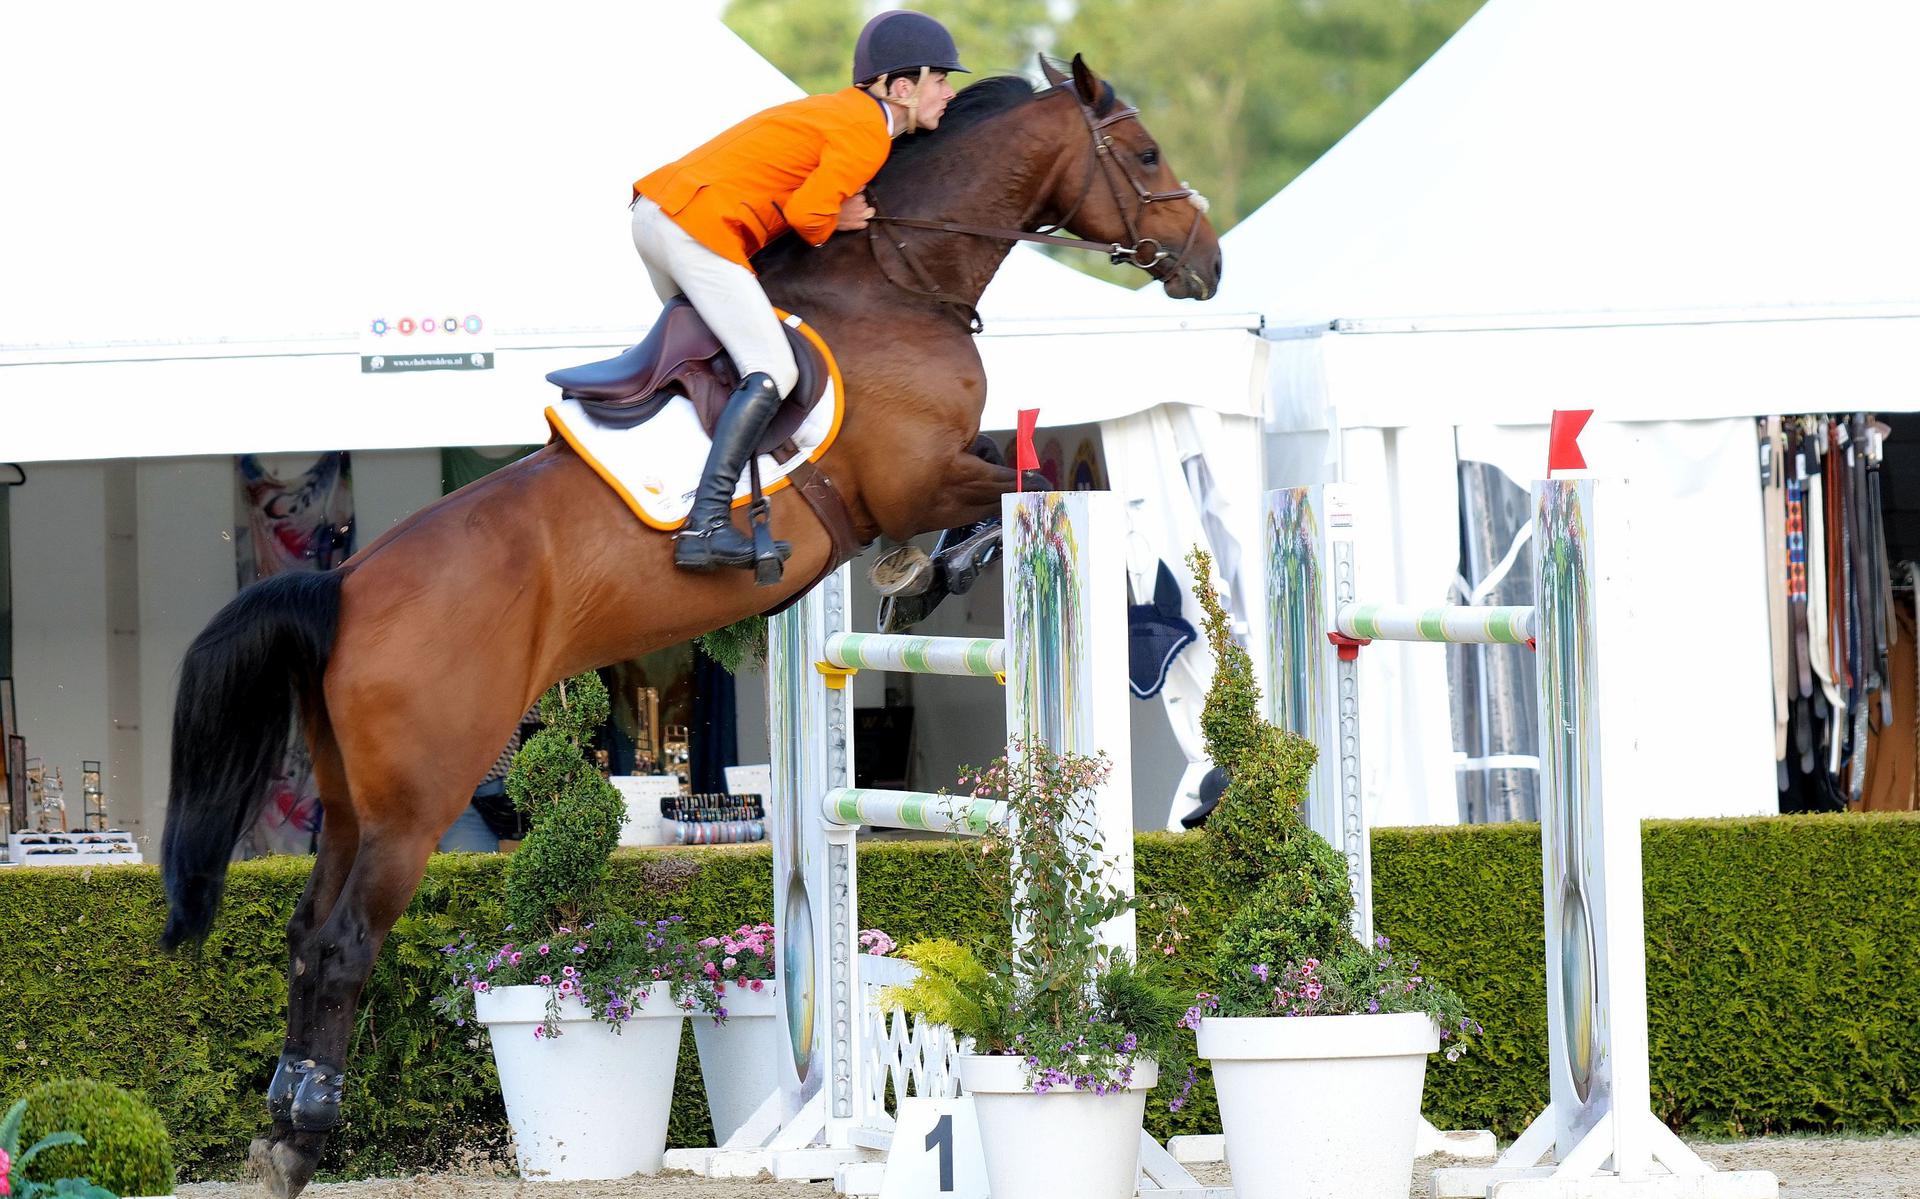 Third place on the podium in Wengen for the Dutch equestrian team, but Belgium was the best of the Young Riders